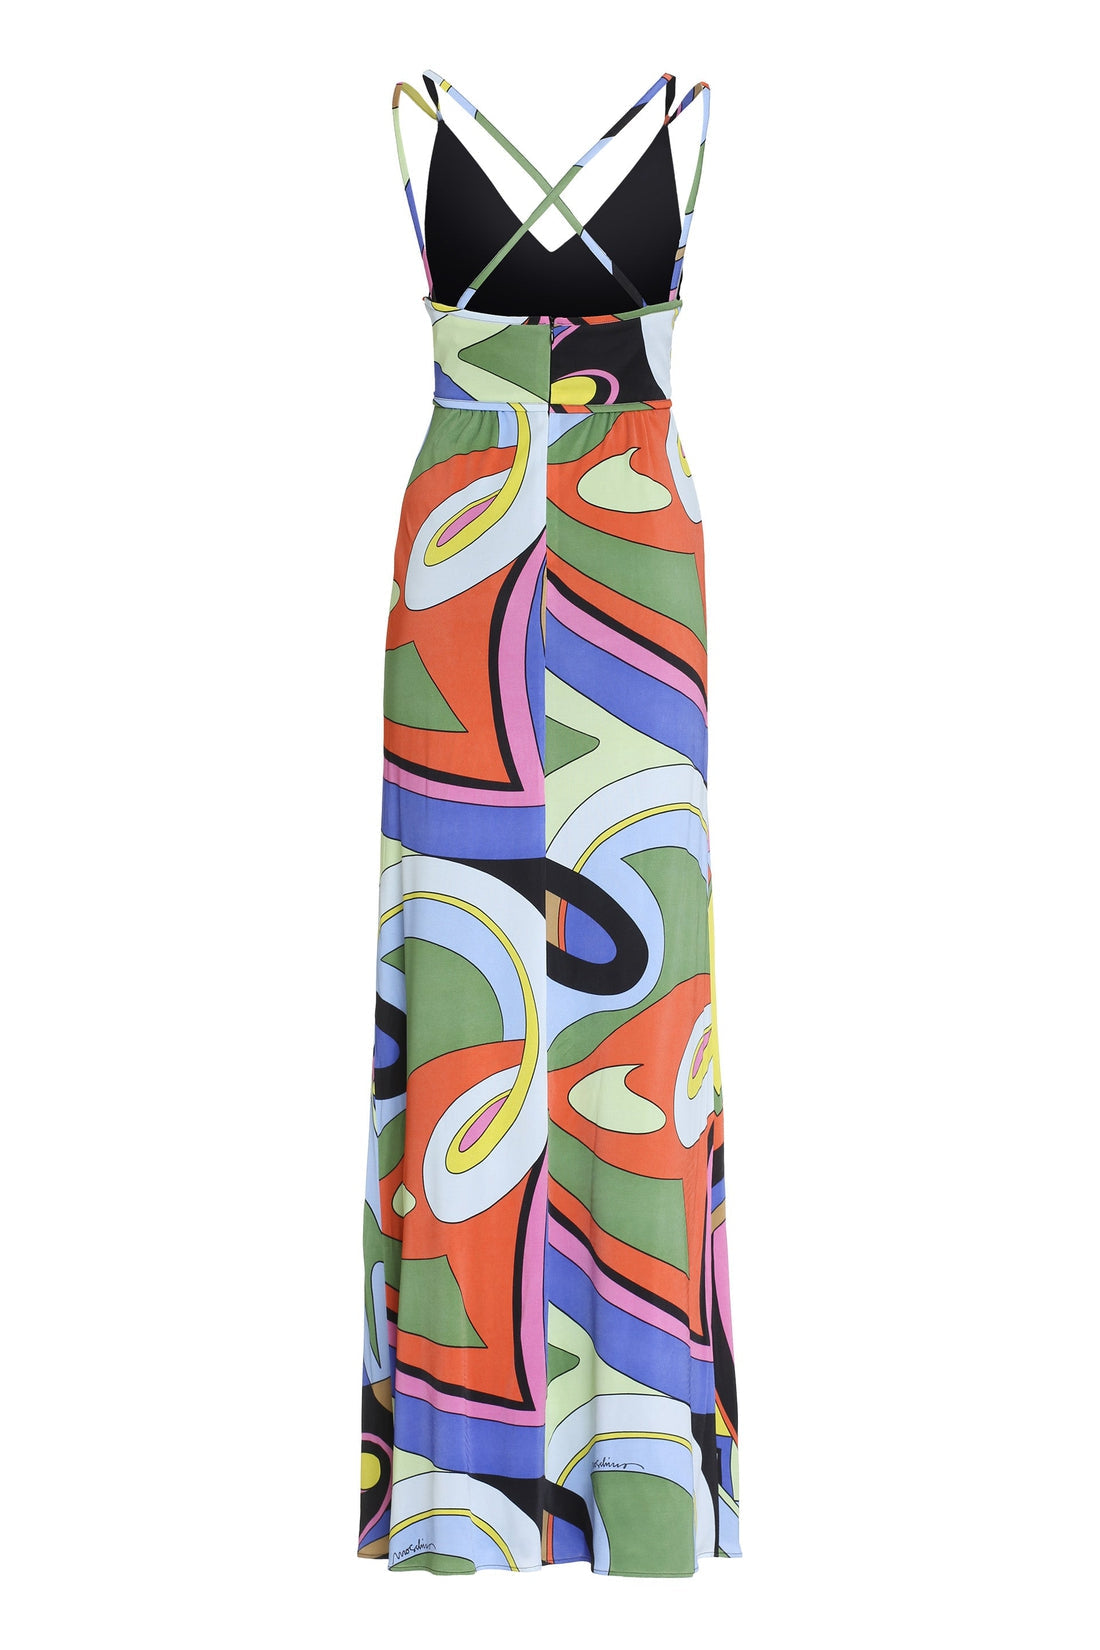 Moschino-OUTLET-SALE-Printed maxi dress-ARCHIVIST